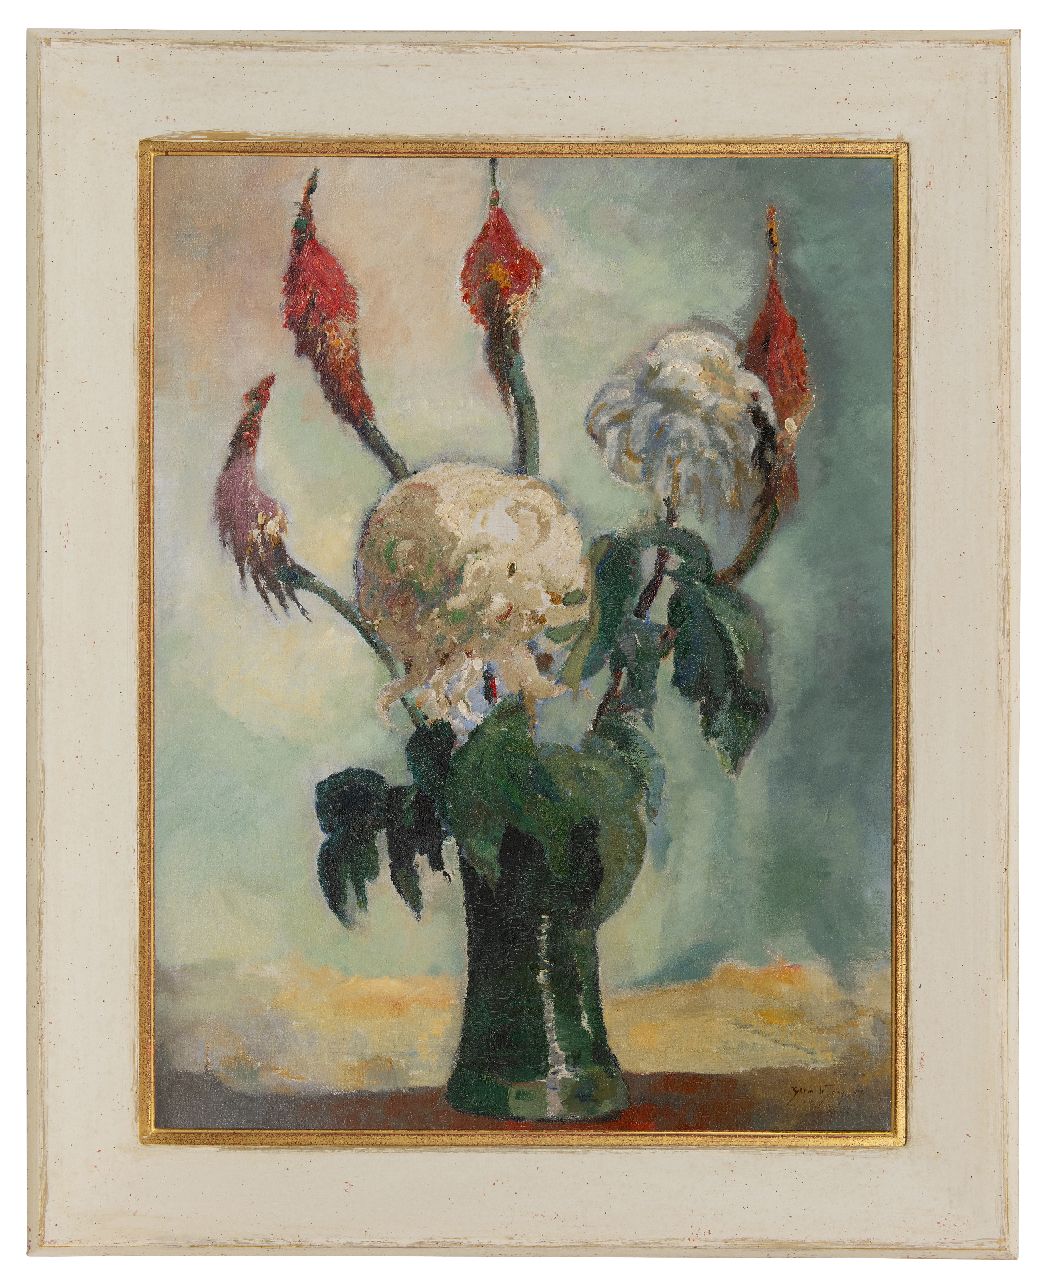 Jong G. de | Gerben 'Germ' de Jong | Paintings offered for sale | Chrysanthemums, oil on canvas 80.4 x 60.4 cm, signed l.r. and dated 1917